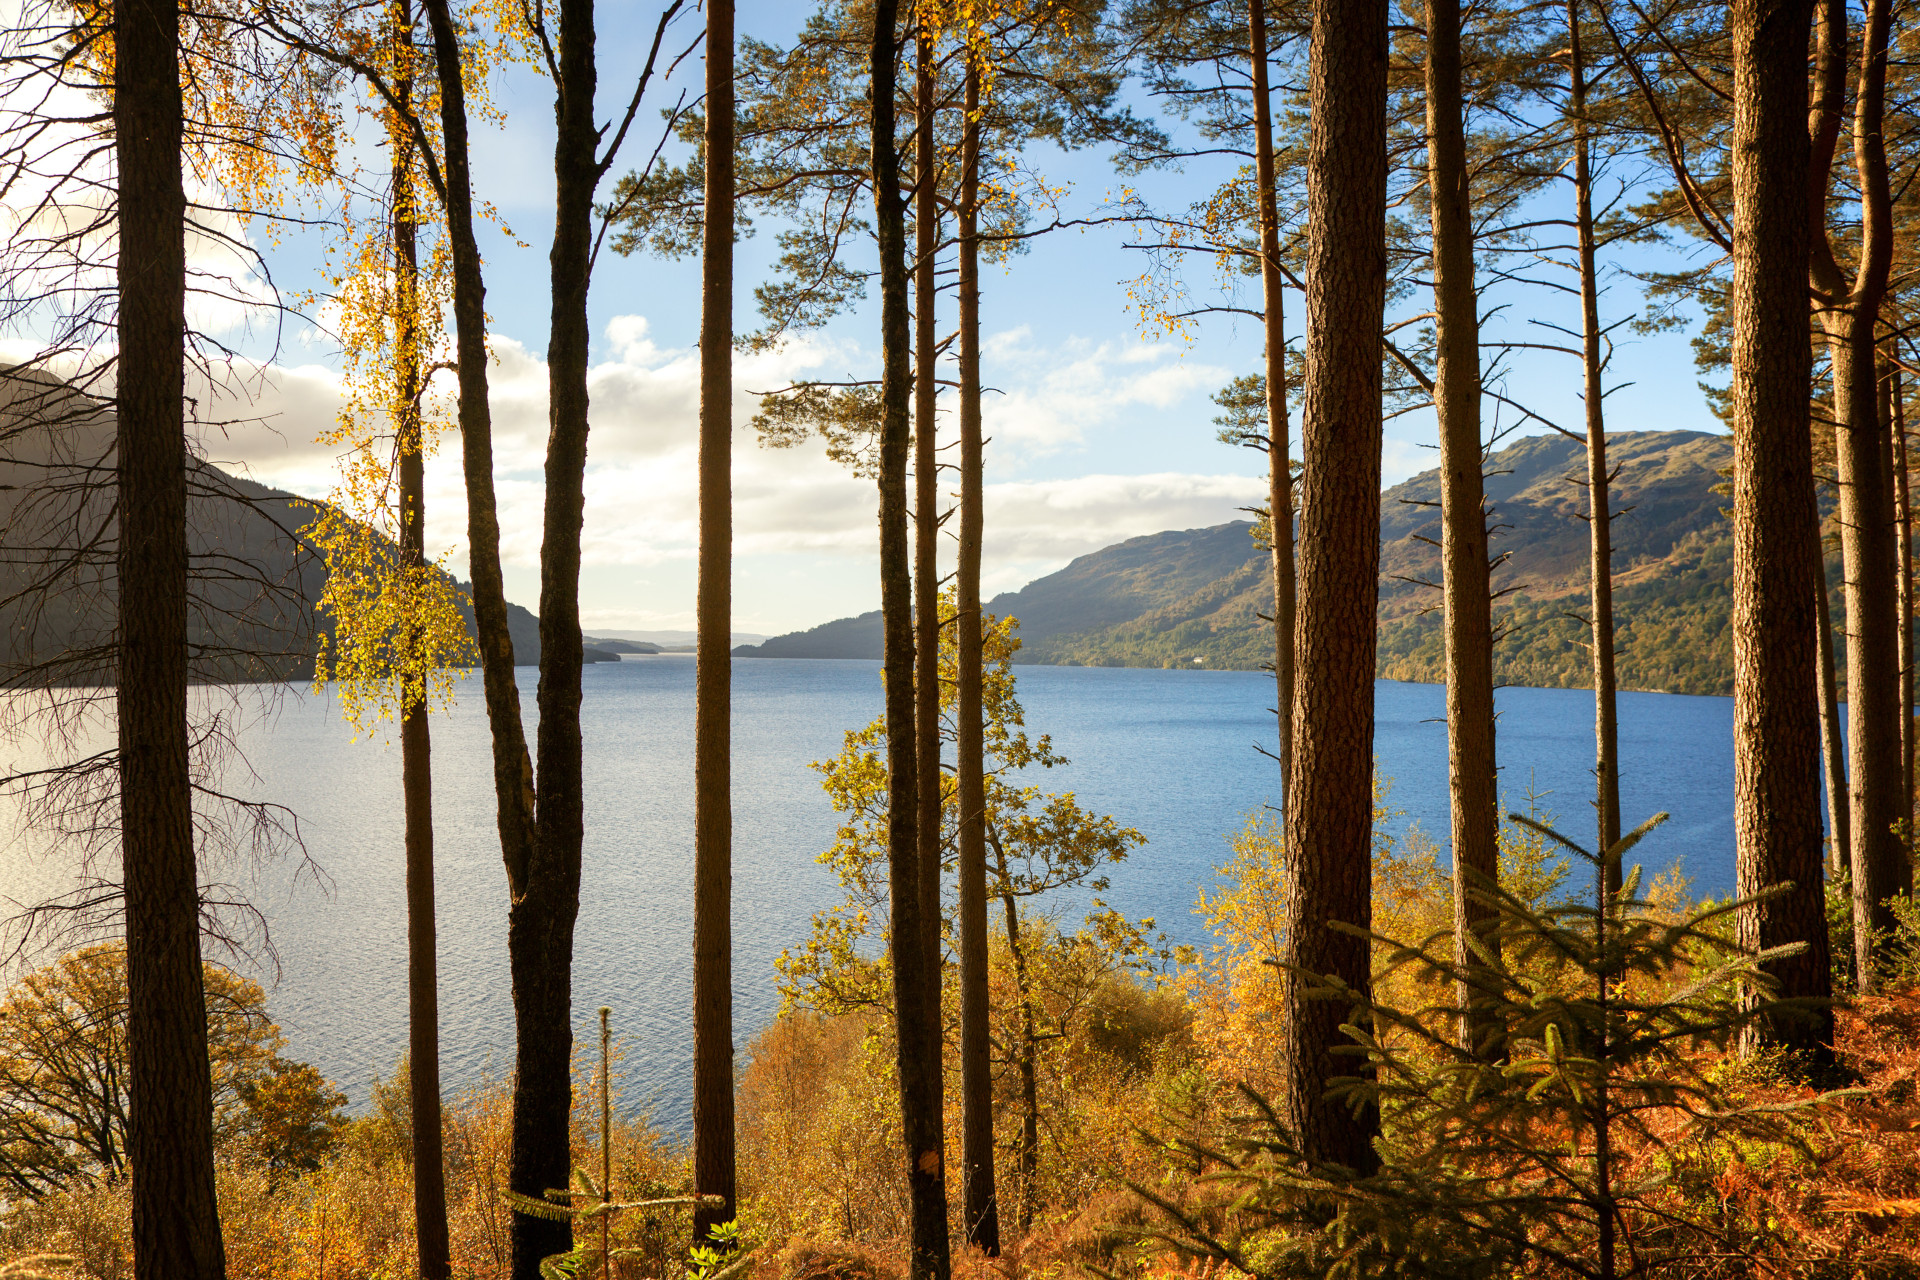 Known as the Road to the Isles, this route starts at the banks of Loch Lomond.<p><a href="https://www.msn.com/en-us/community/channel/vid-7xx8mnucu55yw63we9va2gwr7uihbxwc68fxqp25x6tg4ftibpra?cvid=94631541bc0f4f89bfd59158d696ad7e">Follow us and access great exclusive content every day</a></p>